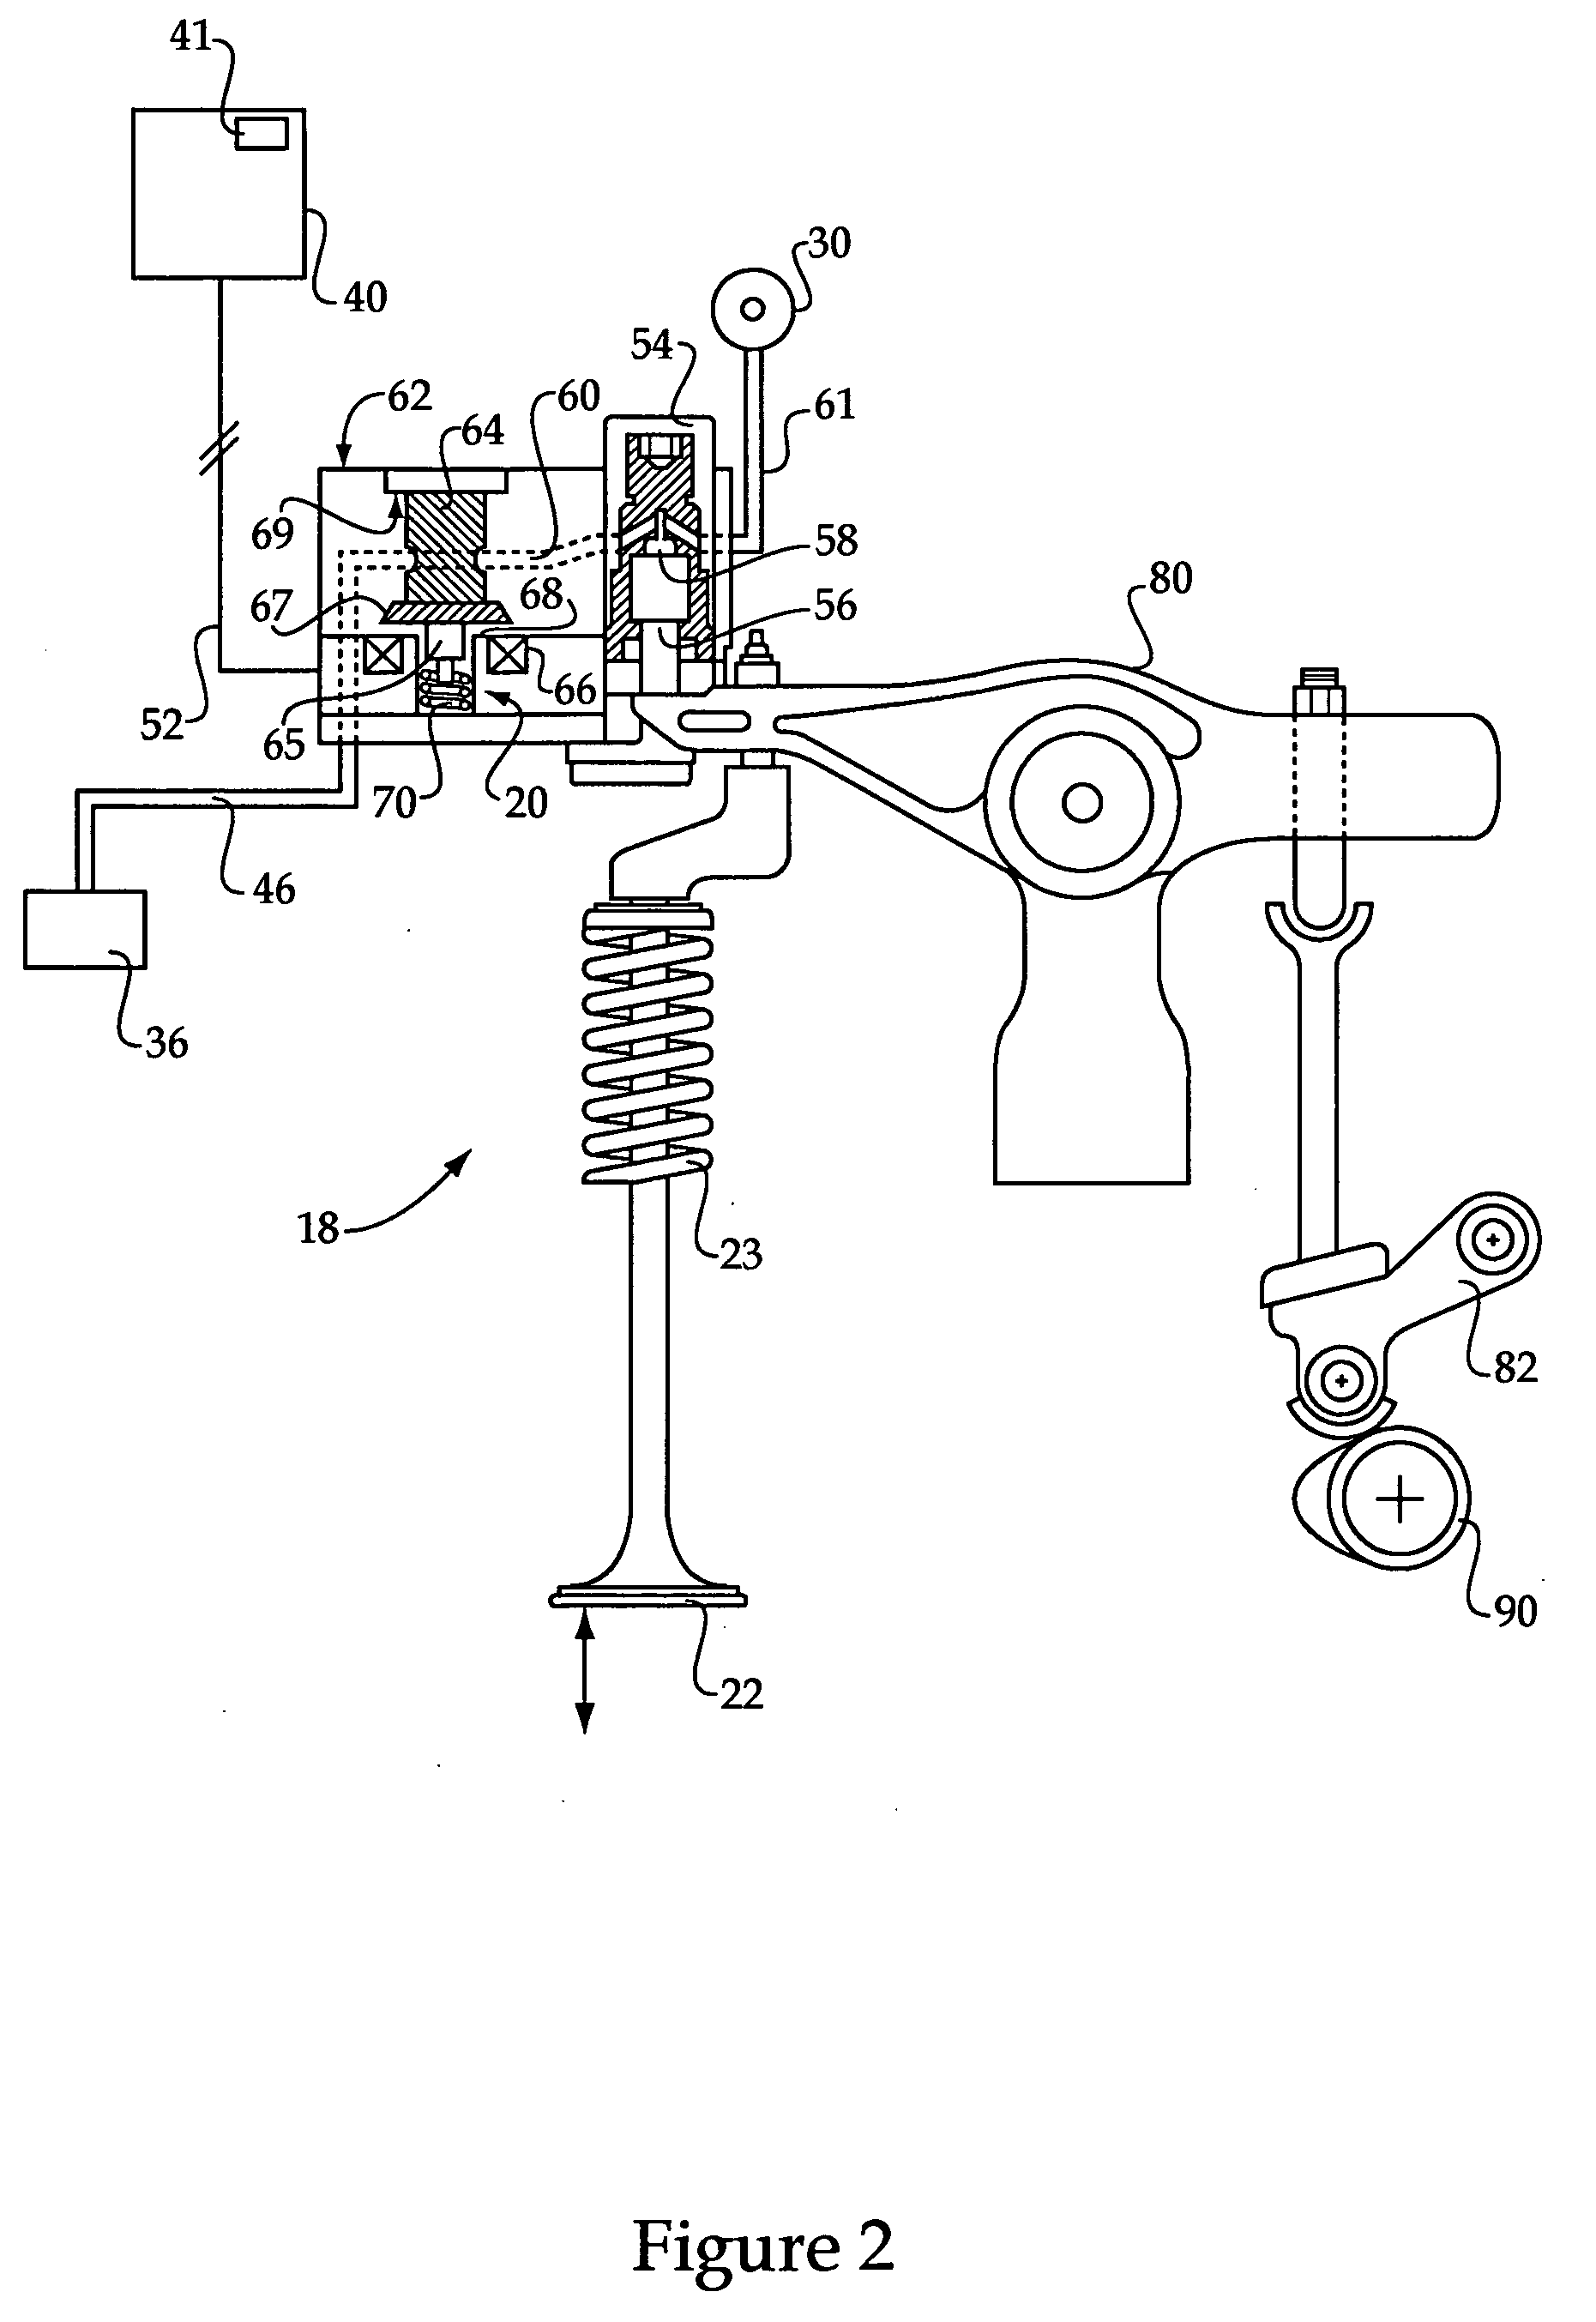 Valve performing detection and modification strategy for internal combustion engine